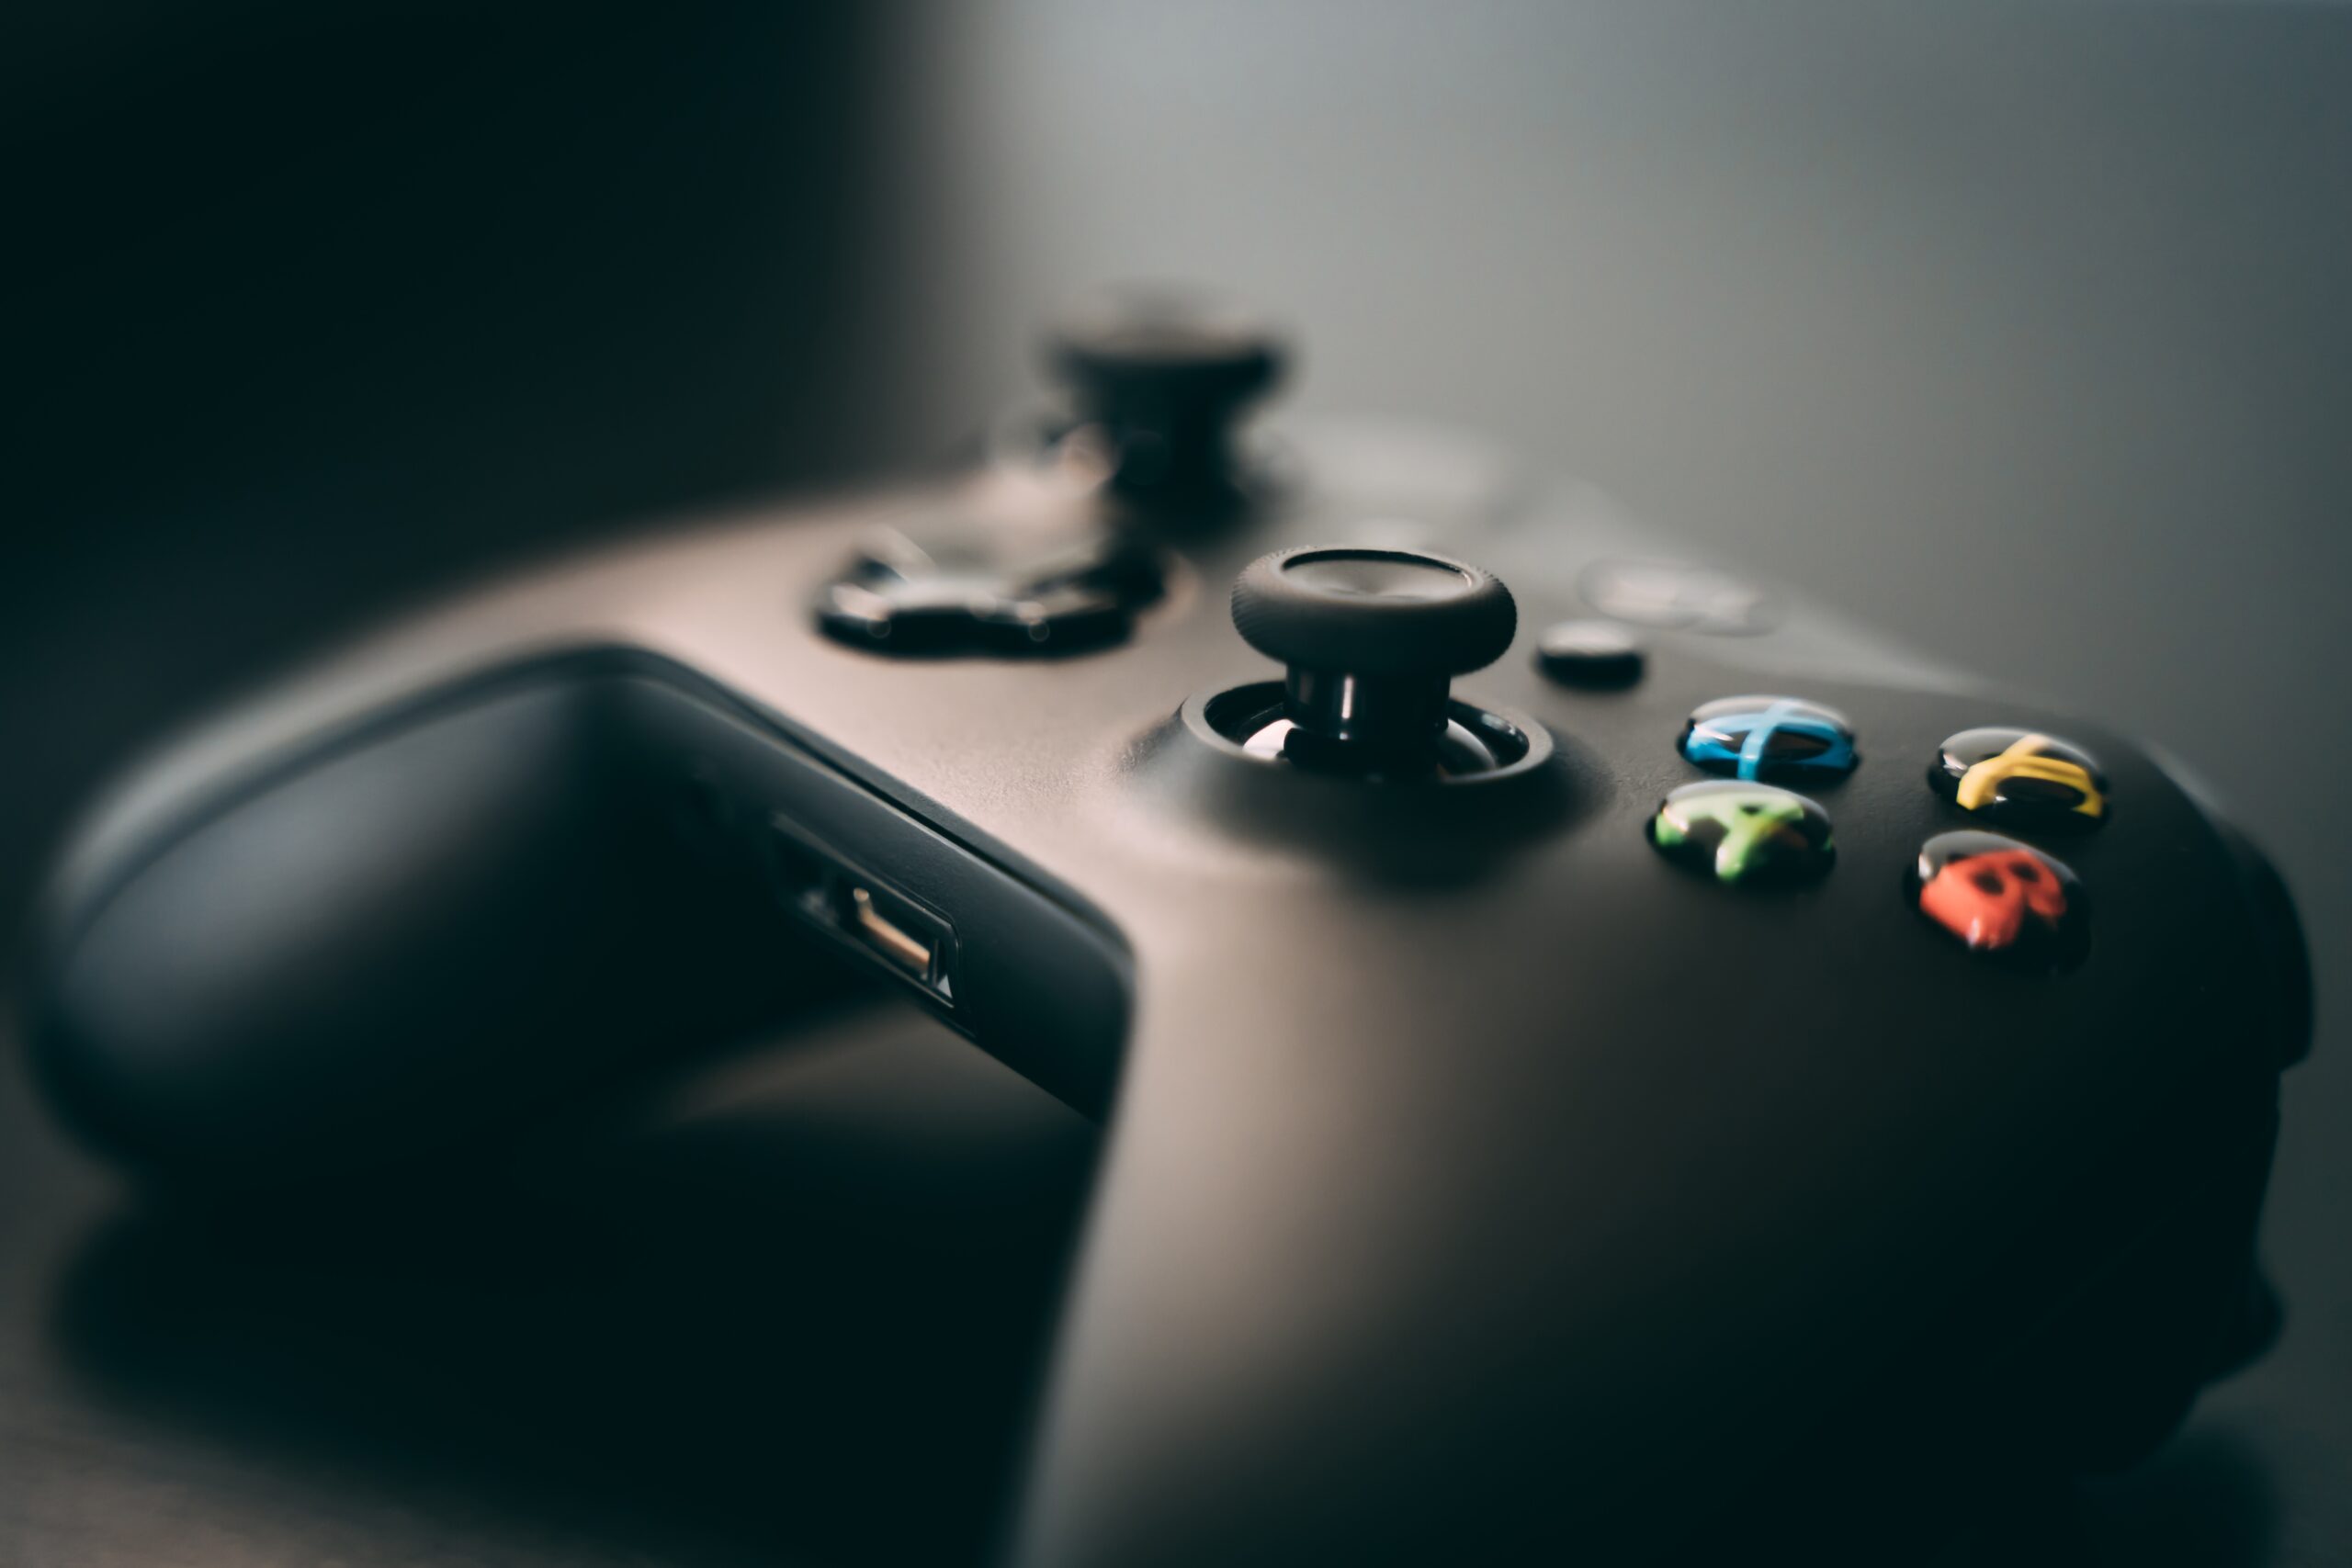 46 Xbox Statistics, Facts, and Trends